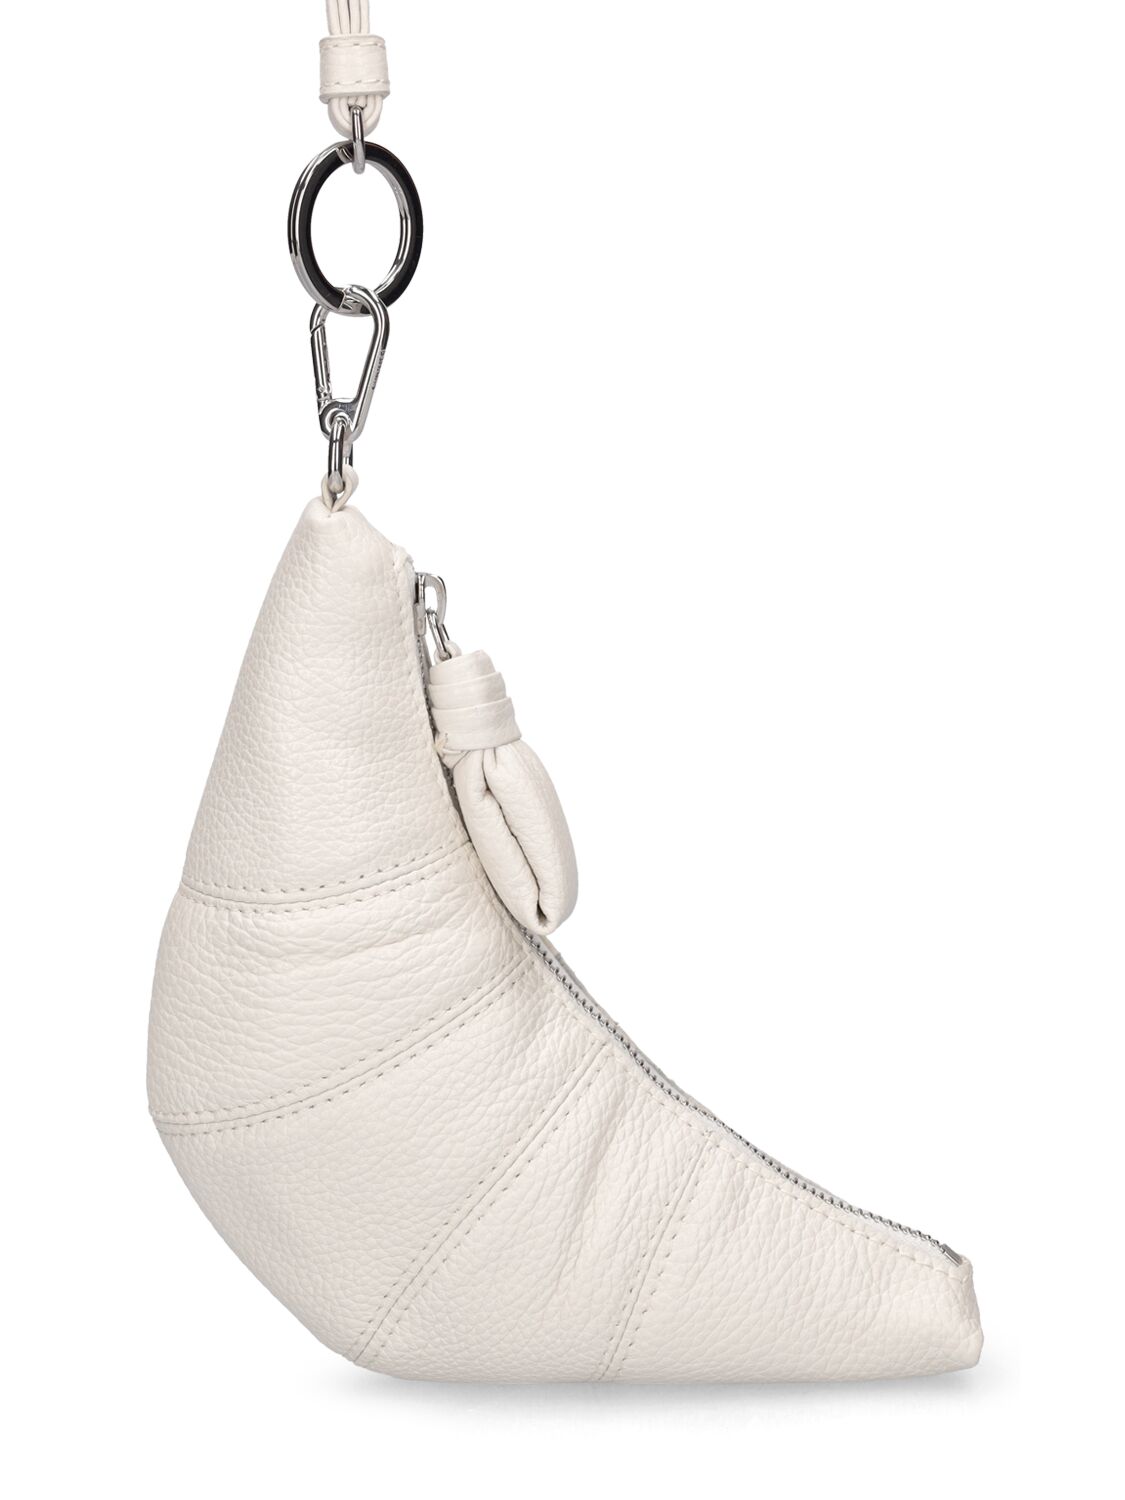 Lemaire Croissant Coin Purse W/ Neck Strap In Chalk